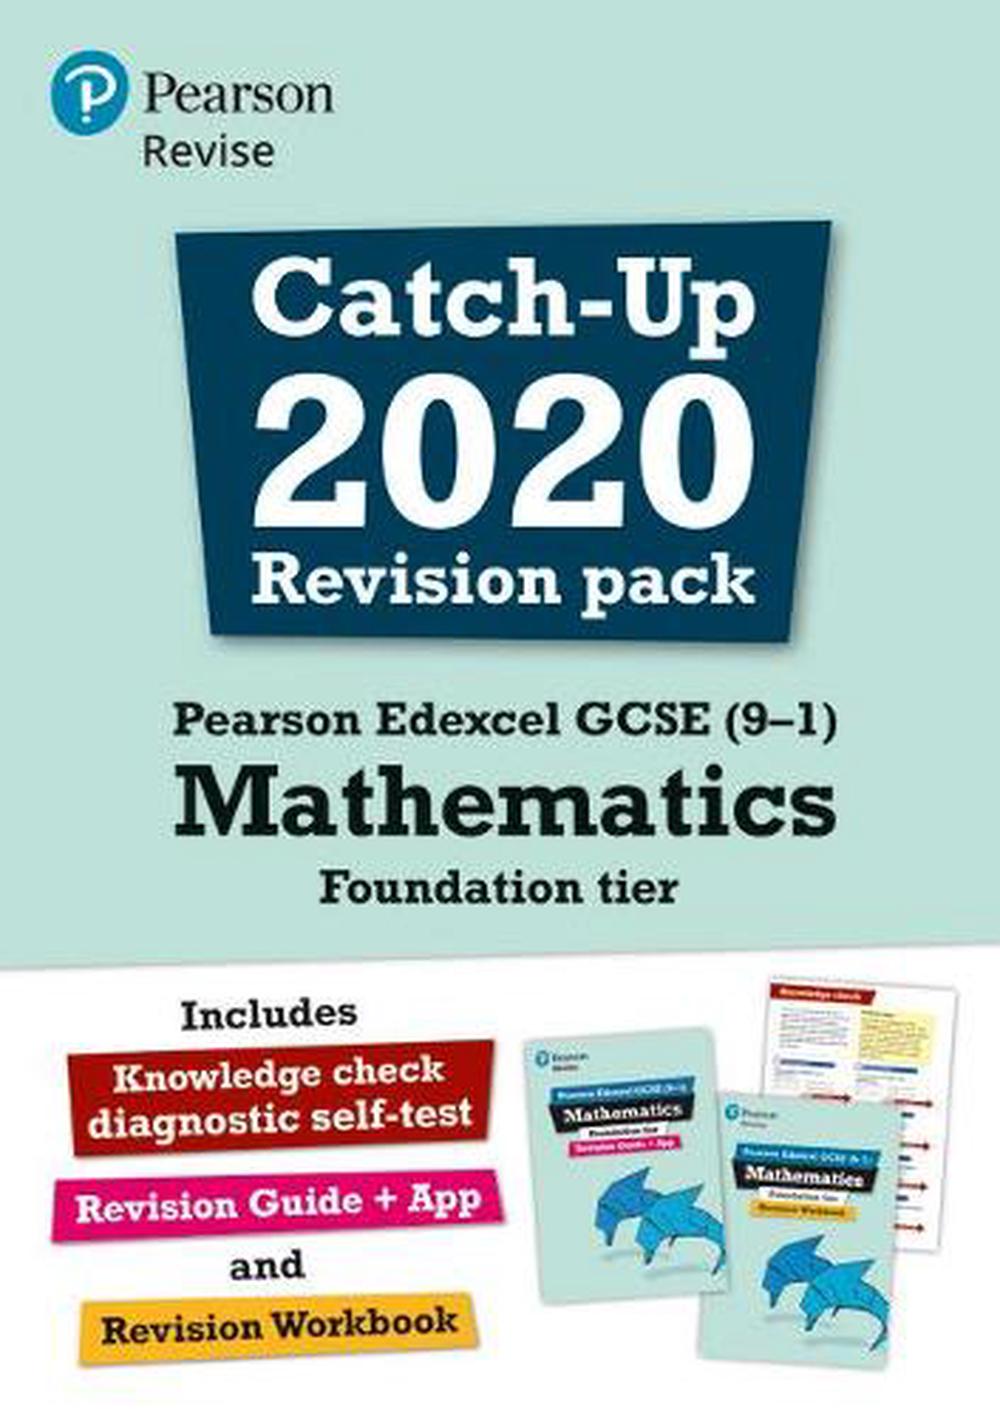 Pearson Revise Edexcel Gcse 9 1 Maths Foundation Catch Up Revision Pack By Harry Smith Book Merchandise Buy Online At Moby The Great